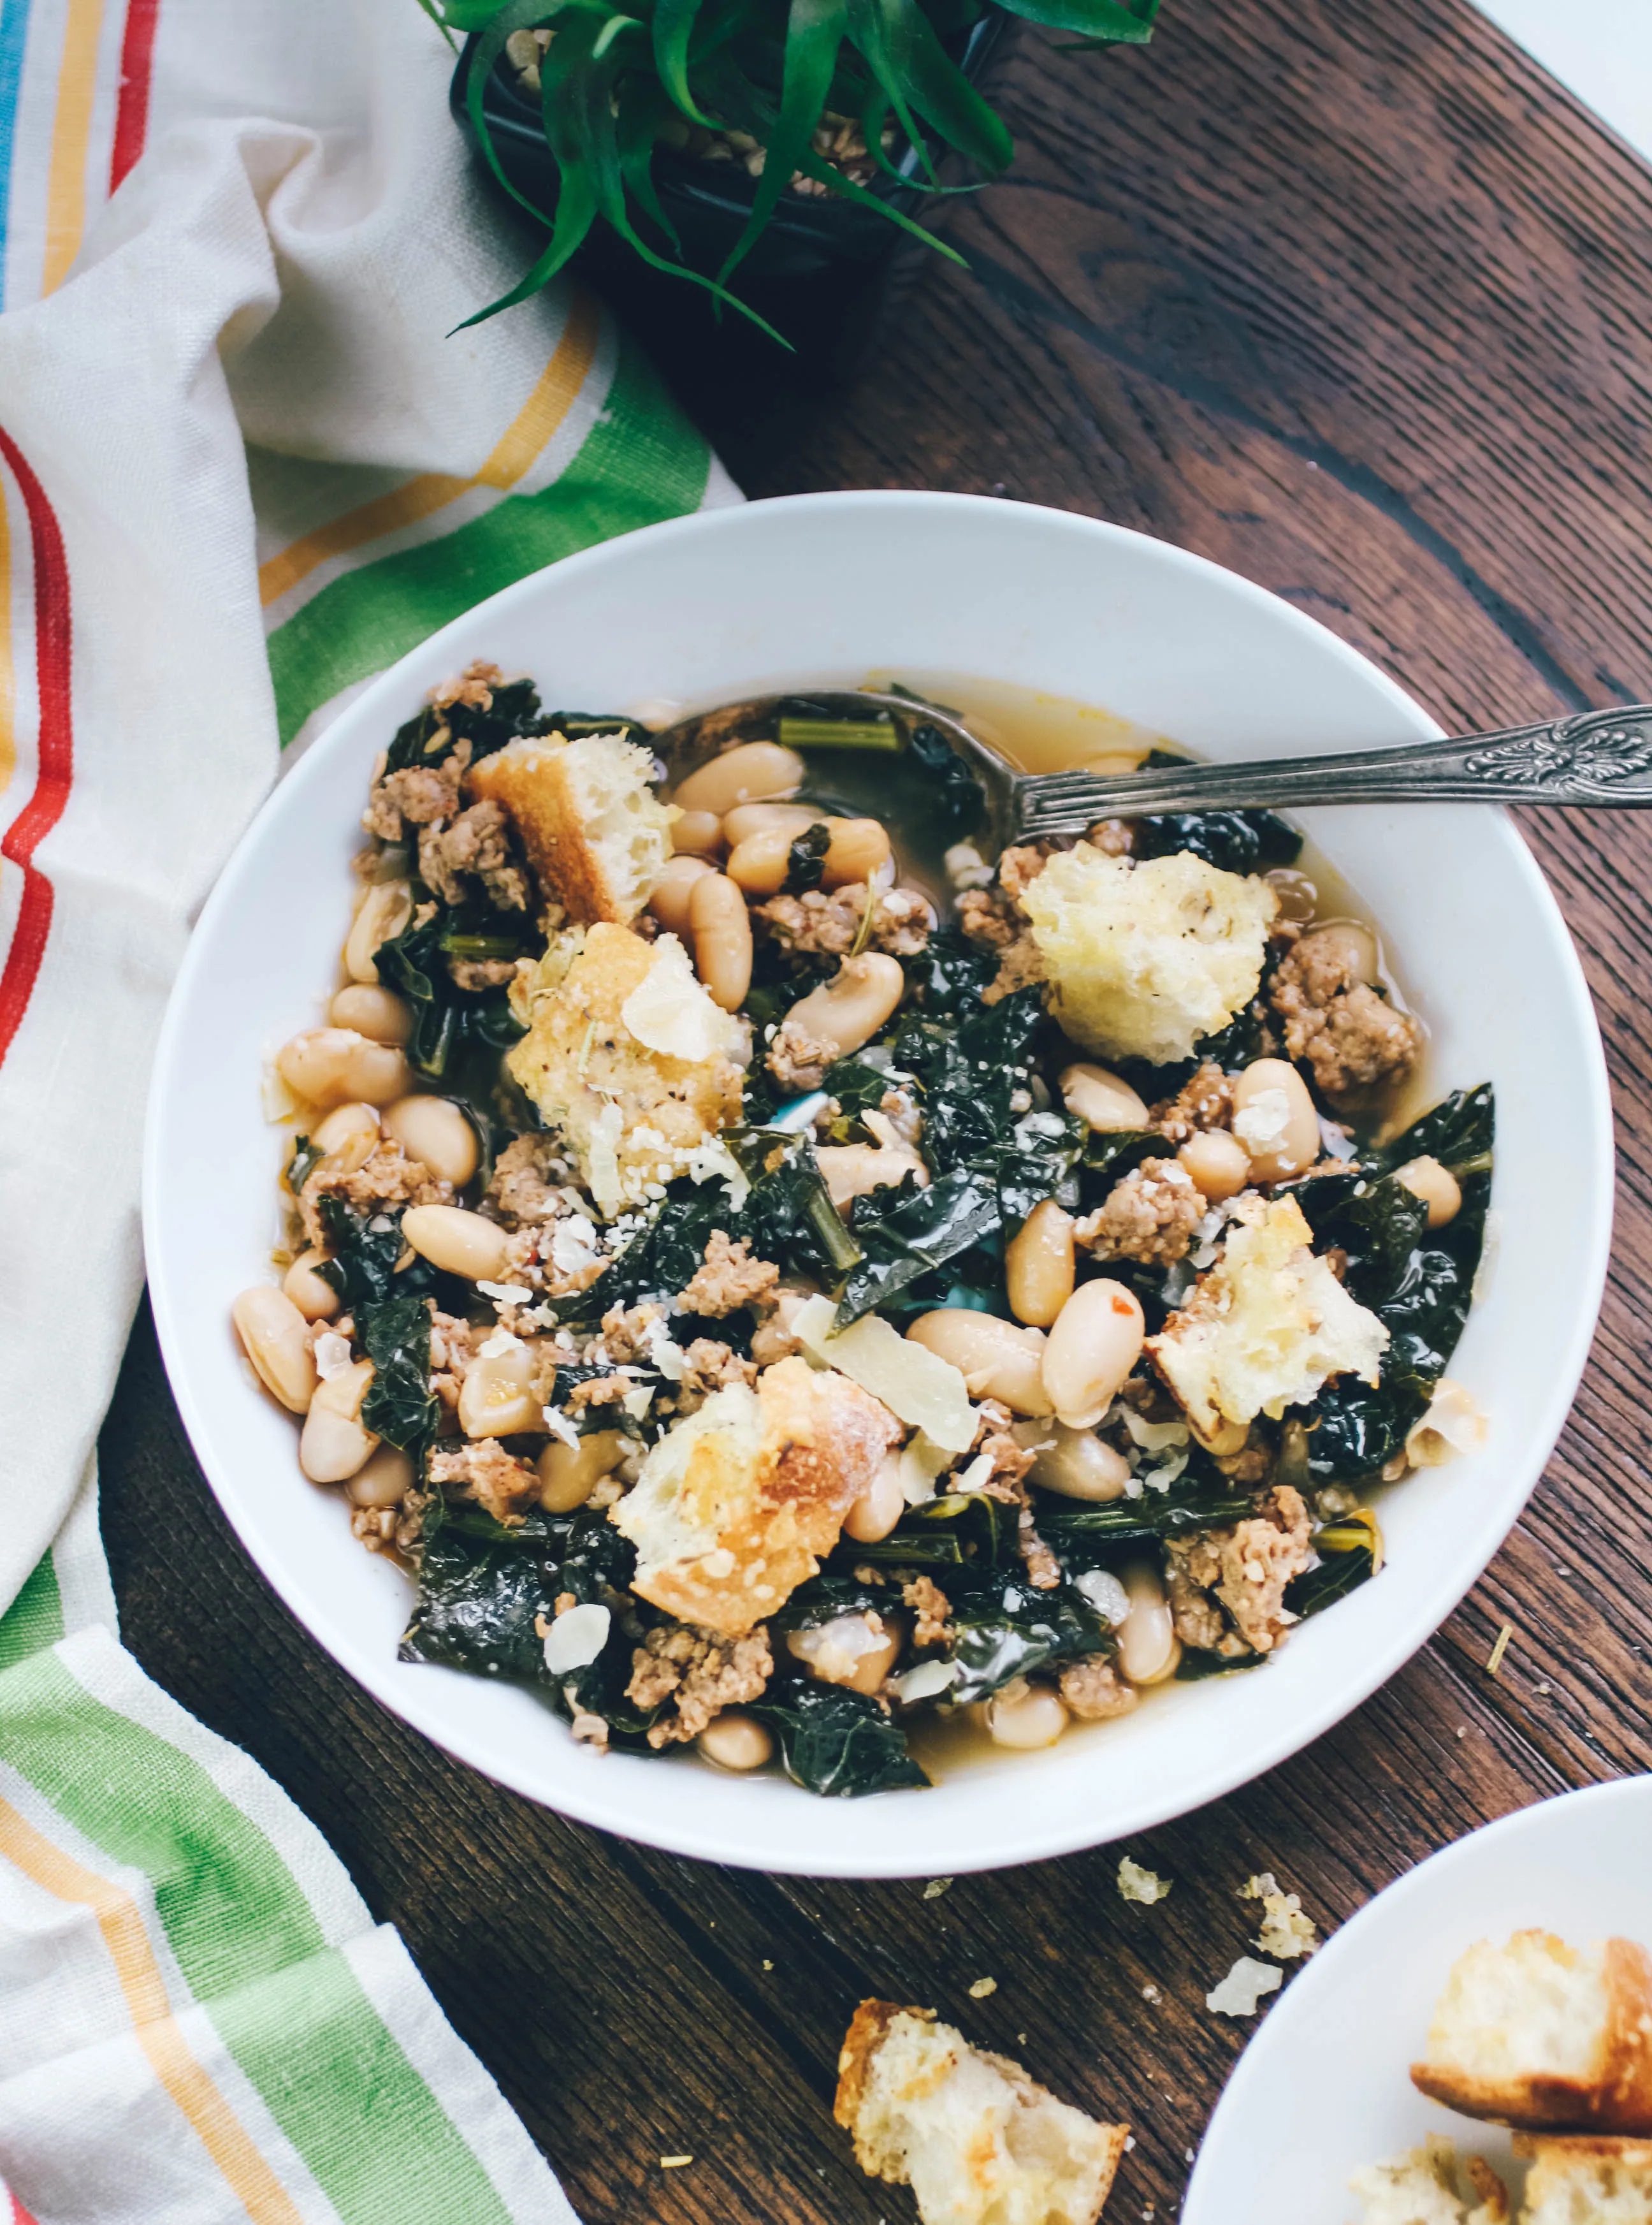 Sausage, Kale, and White Bean Soup with Rosemary-Parmesan Croutons is a tasty dish that's easy to make. If you love soup, you'll love Sausage, Kale, and White Bean Soup with Rosemary-Parmesan Croutons!